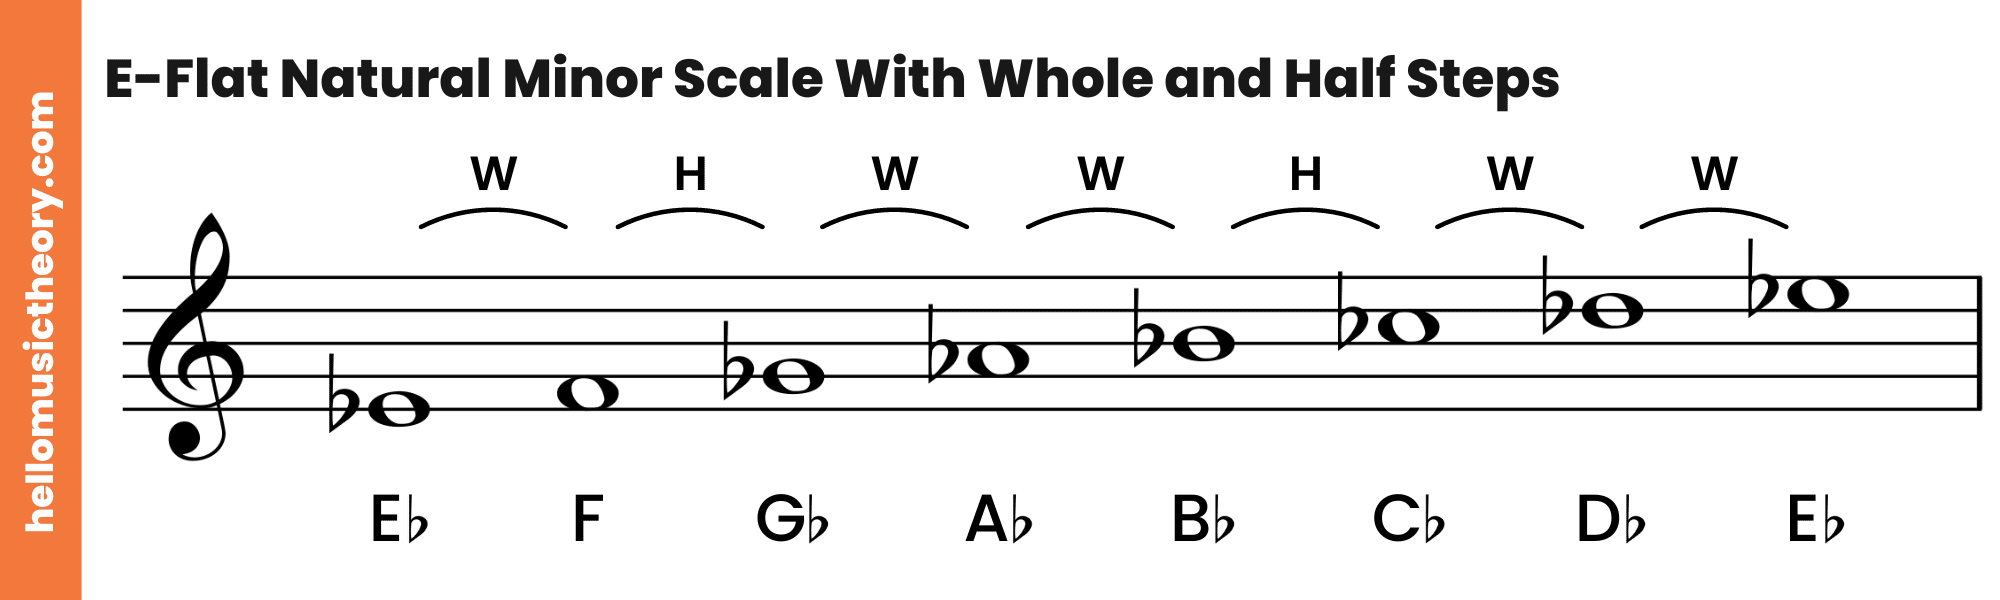 E-Flat Natural Minor Scale Treble Clef Ascending With Whole and Half Steps